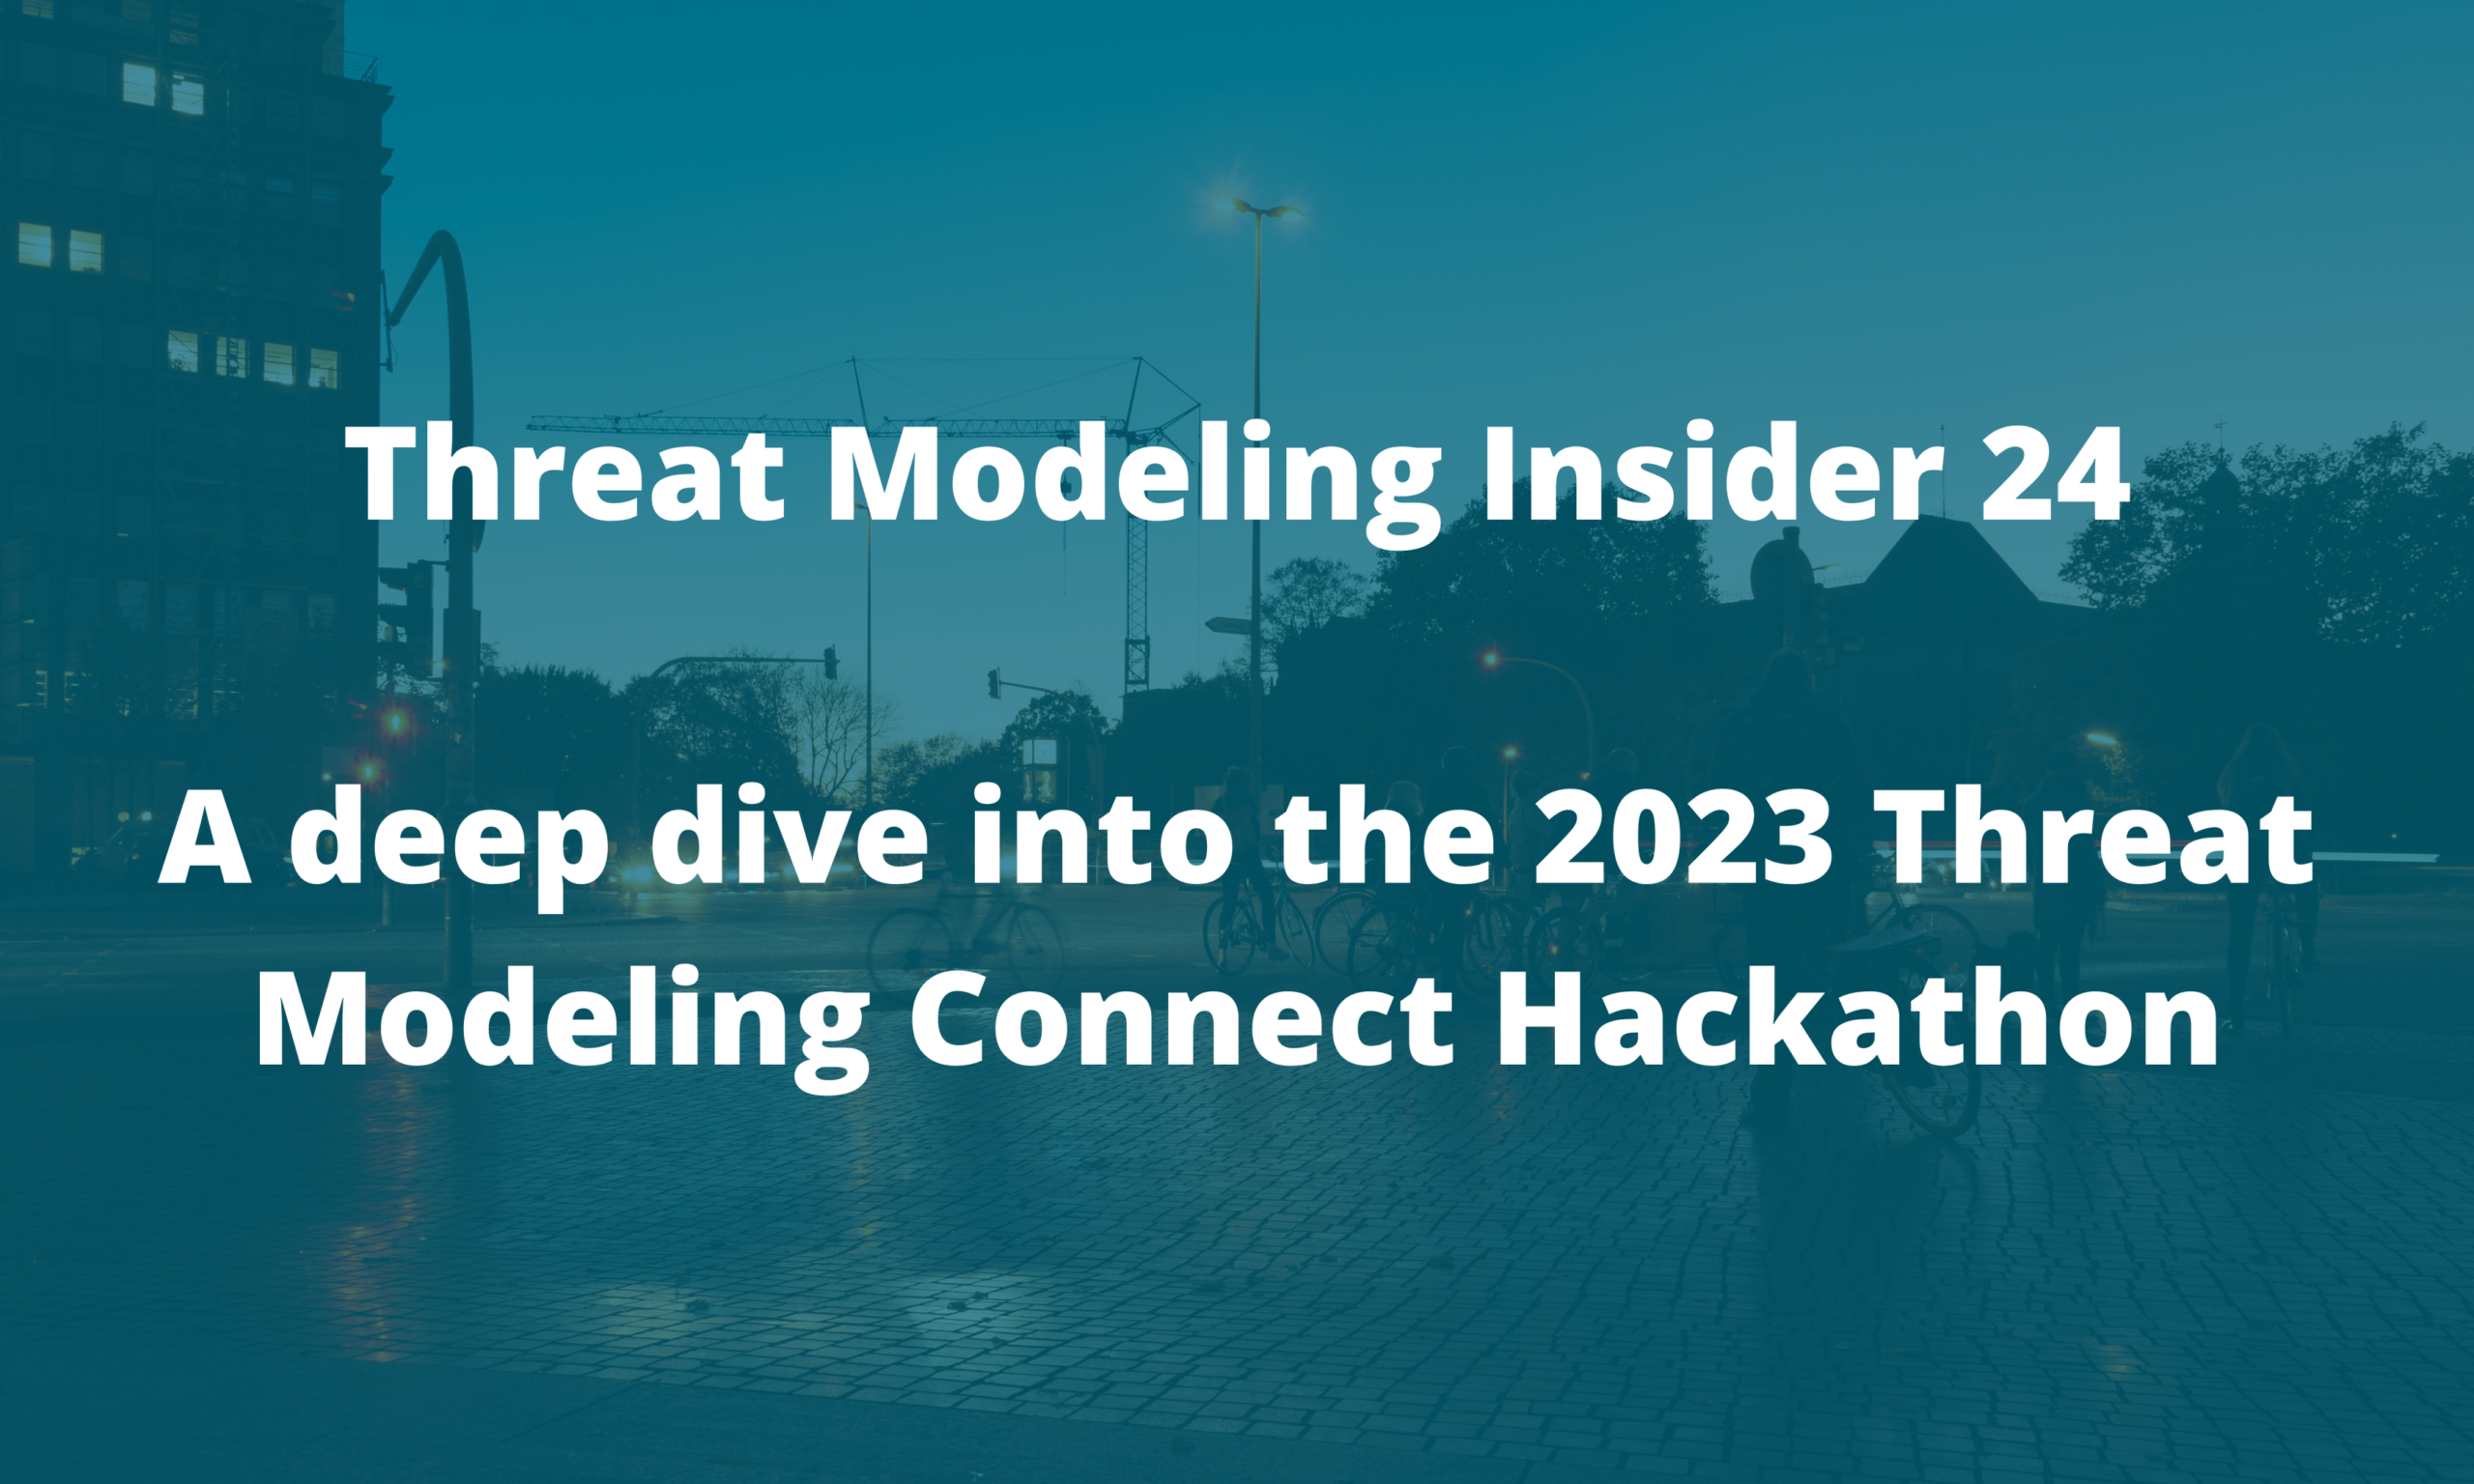 TMI newsletter 24 – A deep dive into the 2023 Threat Modeling Connect Hackathon